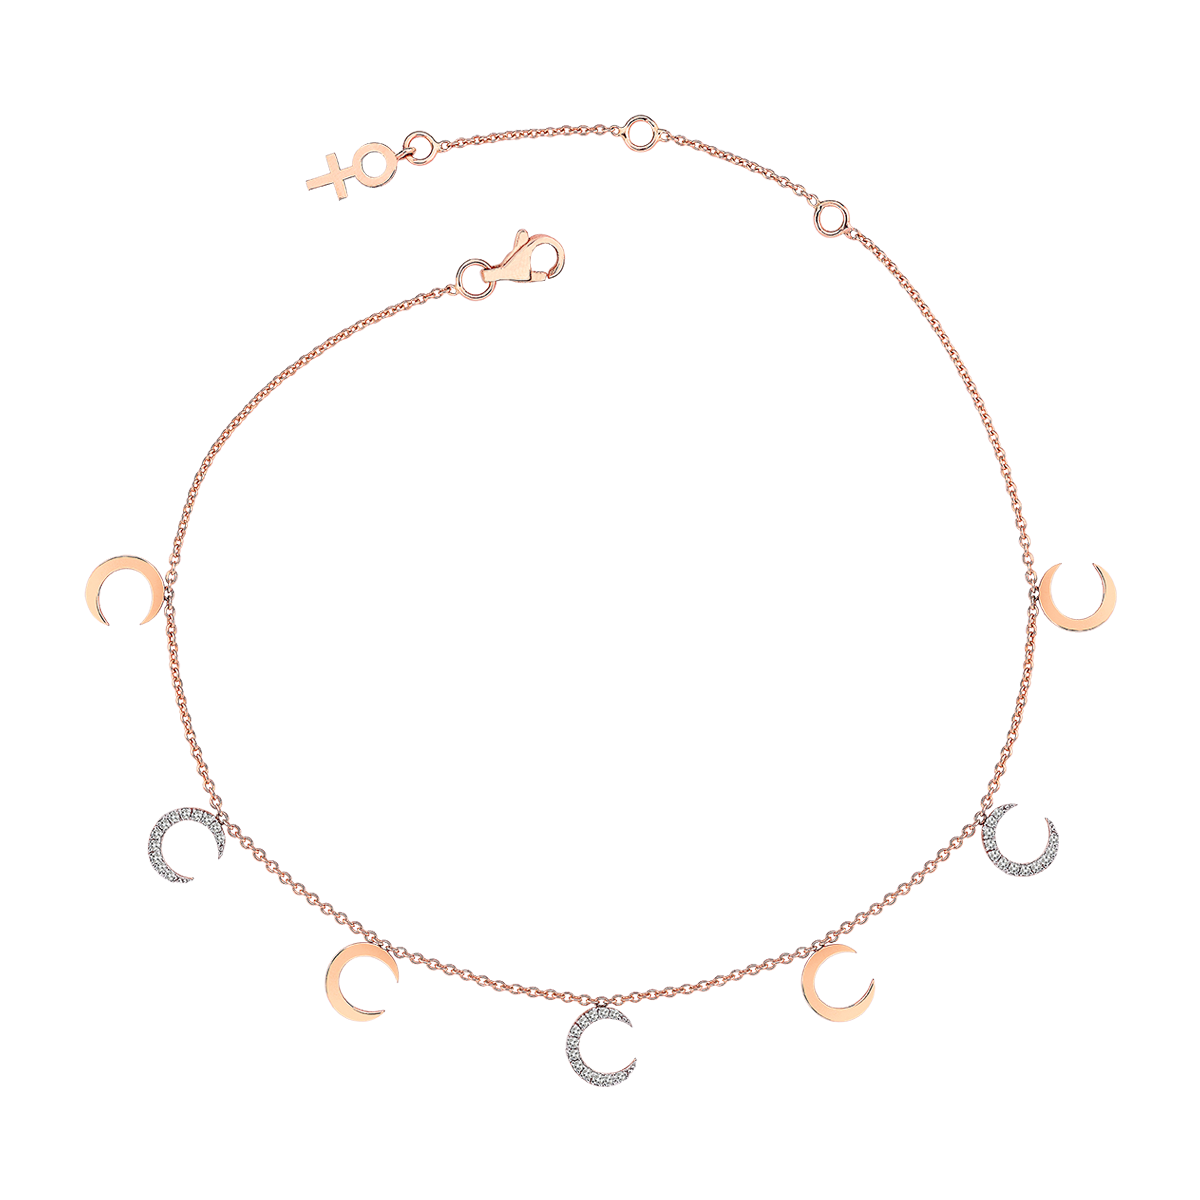 Selenophile Half Diamond Anklet in Rose Gold - Her Story Shop